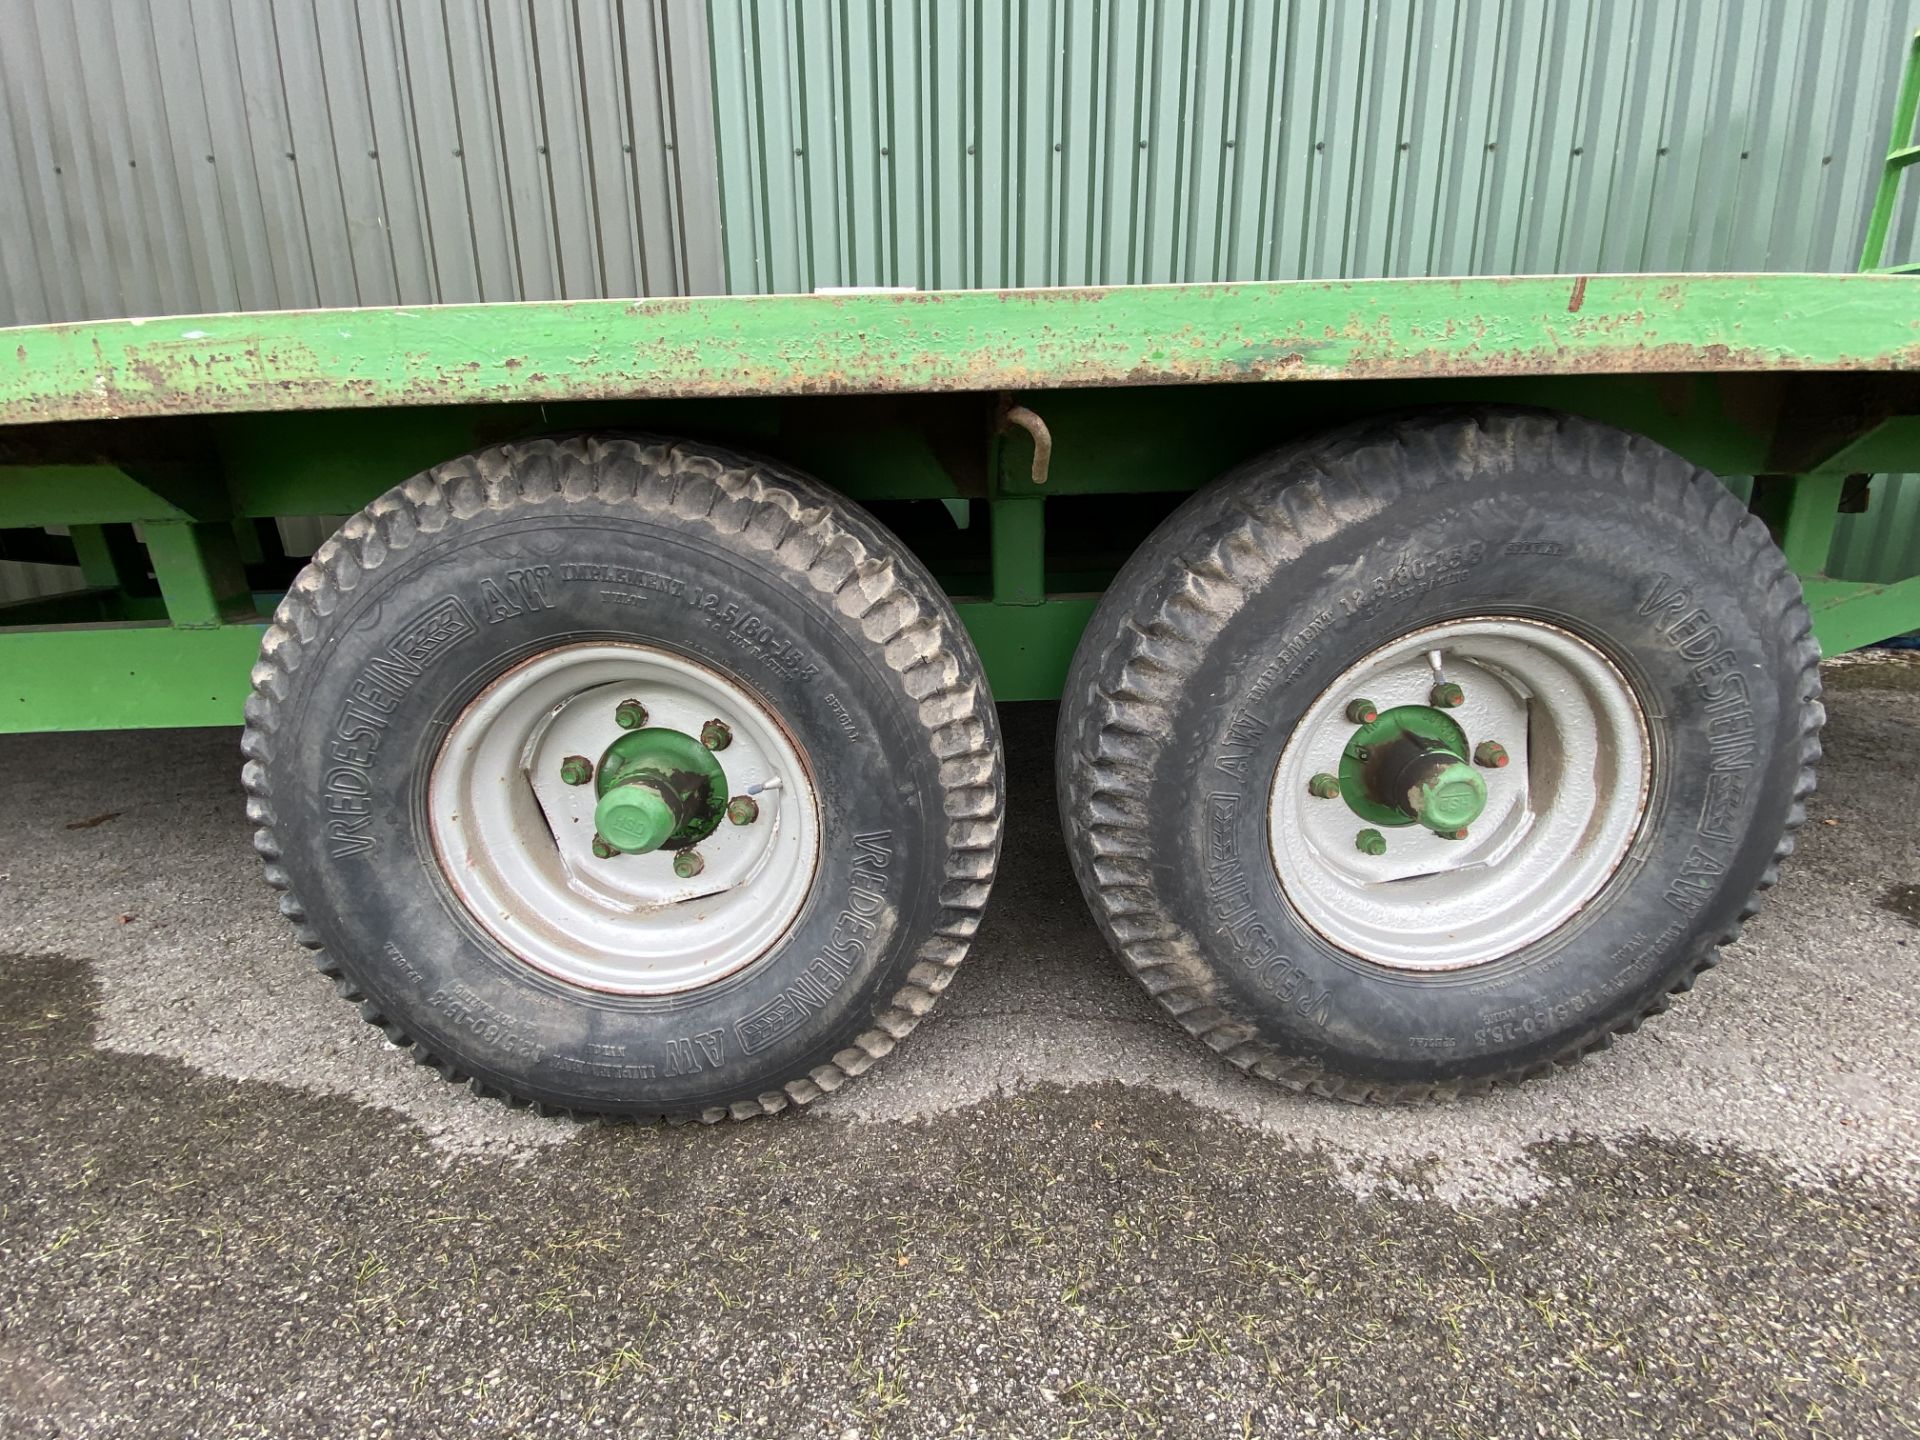 A 24 FOOT TANDEM AXLE BALE TRAILER WITH CHEQUER PLATE FLOORS AND ON 12.5/80 15.3 14PLY TYRES - Image 2 of 2